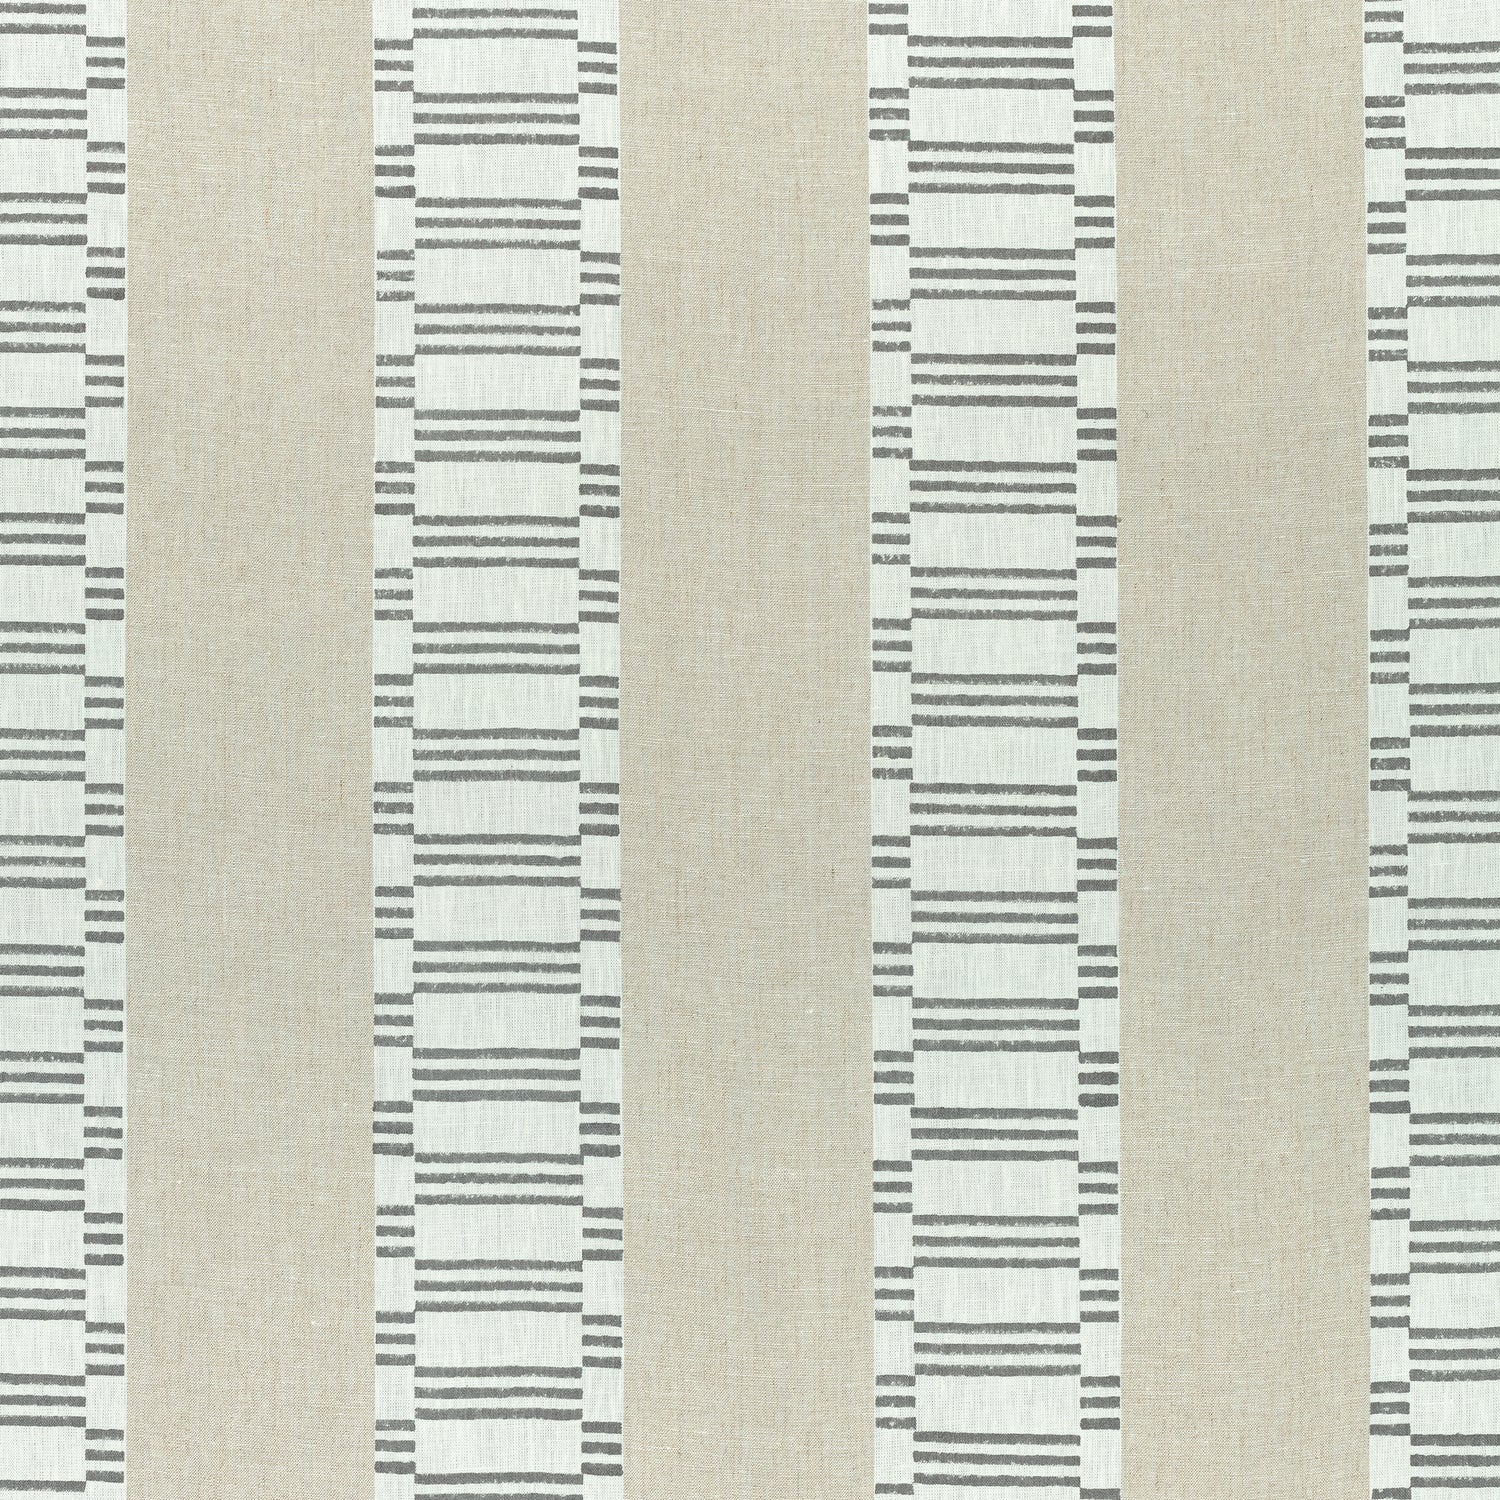 Japonic Stripe fabric in grey color - pattern number AF9820 - by Anna French in the Nara collection